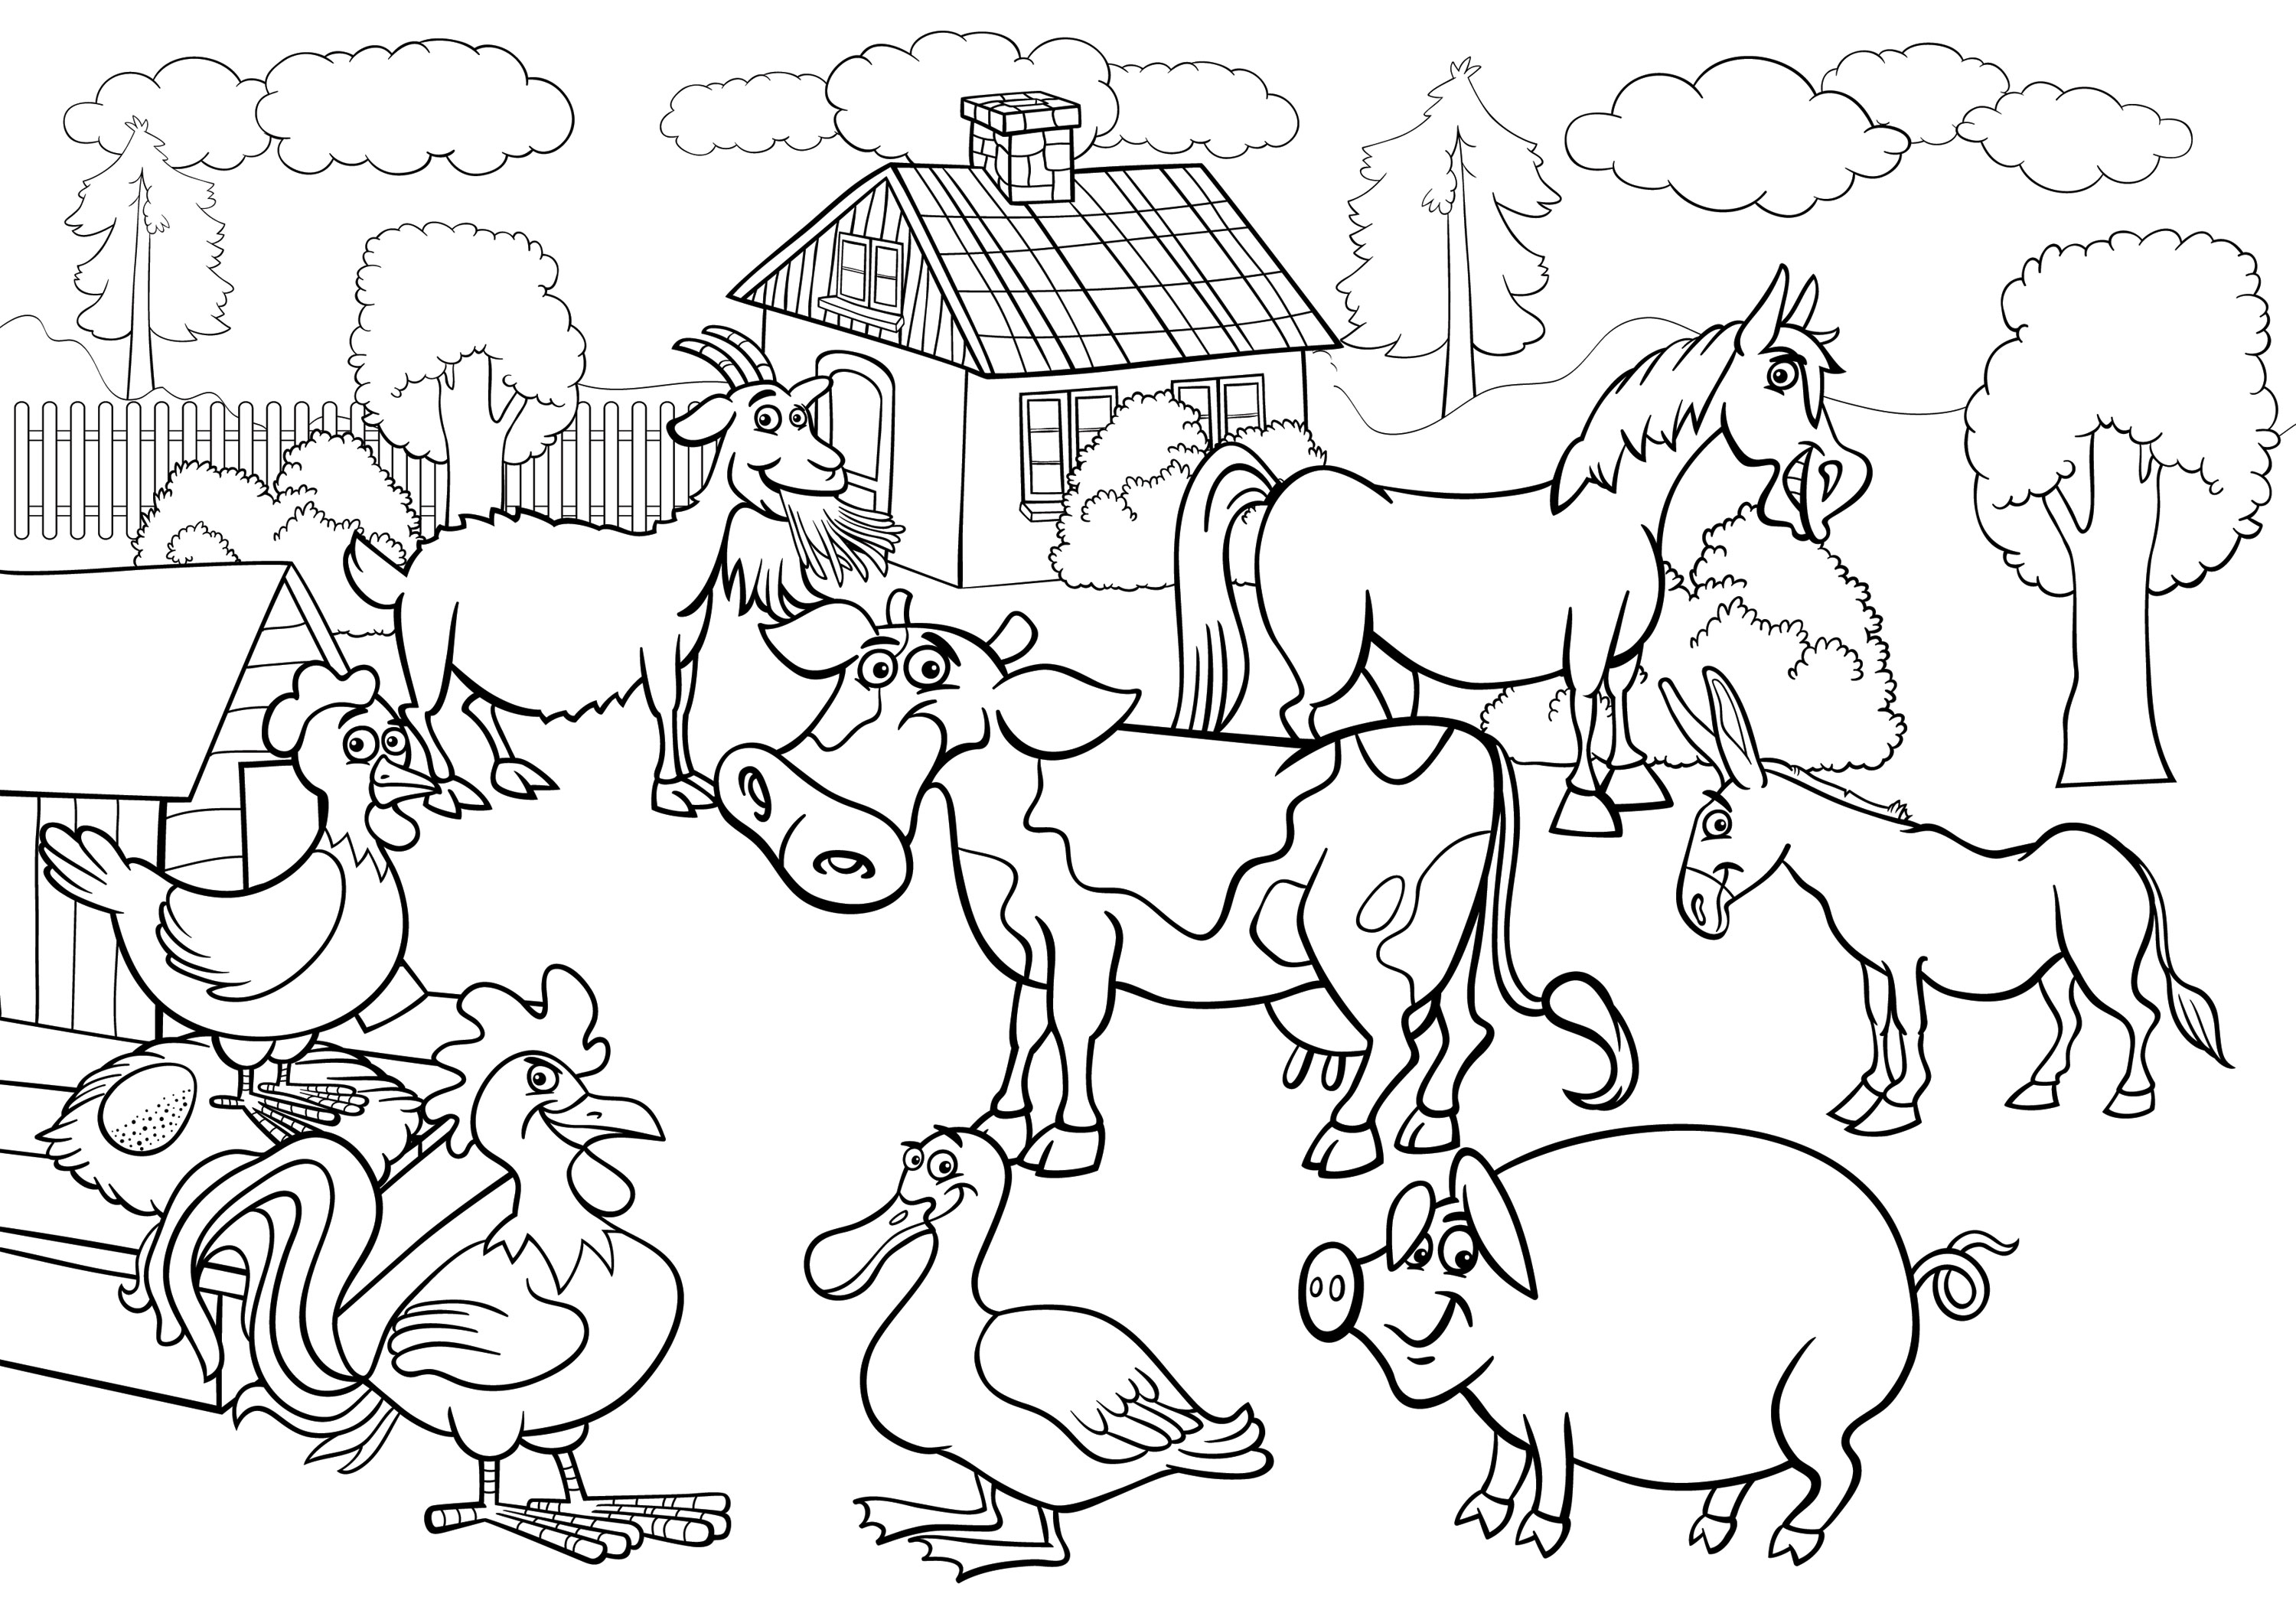 zoomoo coloring pages - photo #30